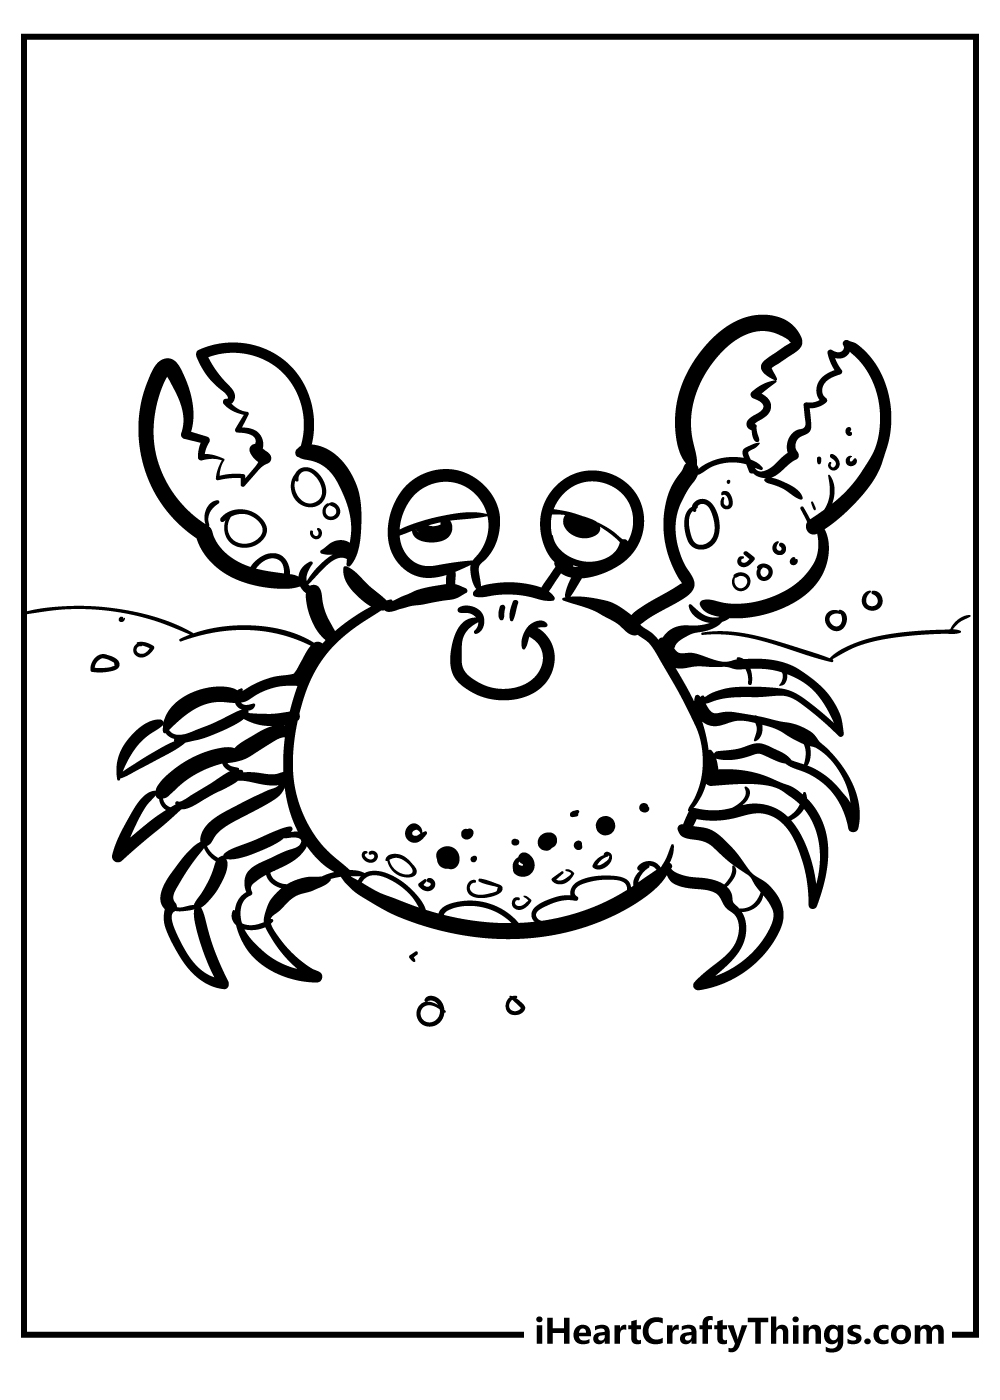 Crab Coloring Sheet for children free download